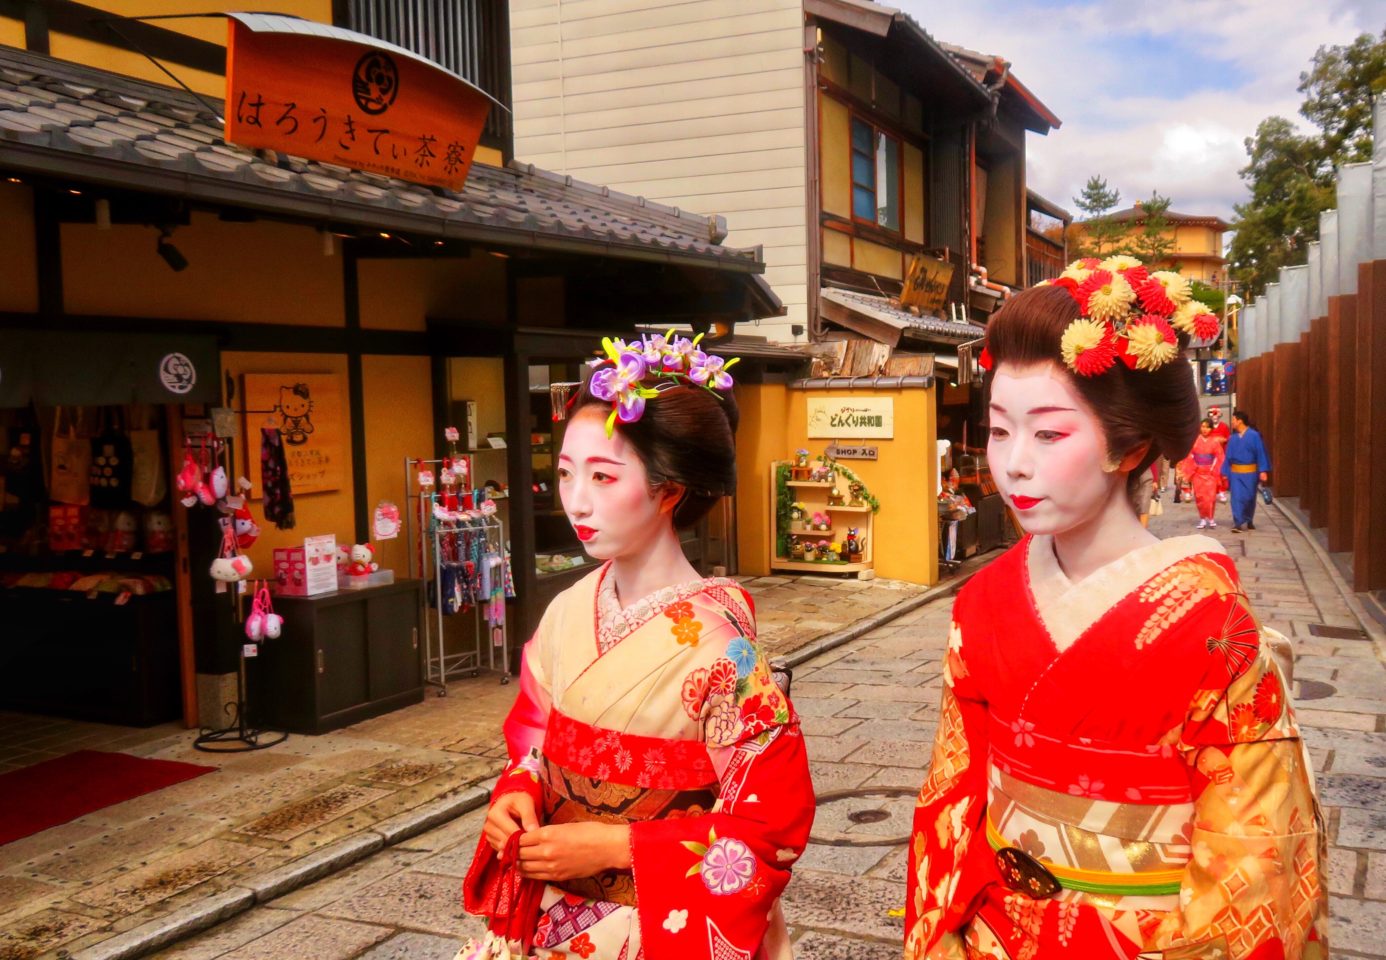 Japan Favorite Experiences ~ The Gion district in Kyoto Japan